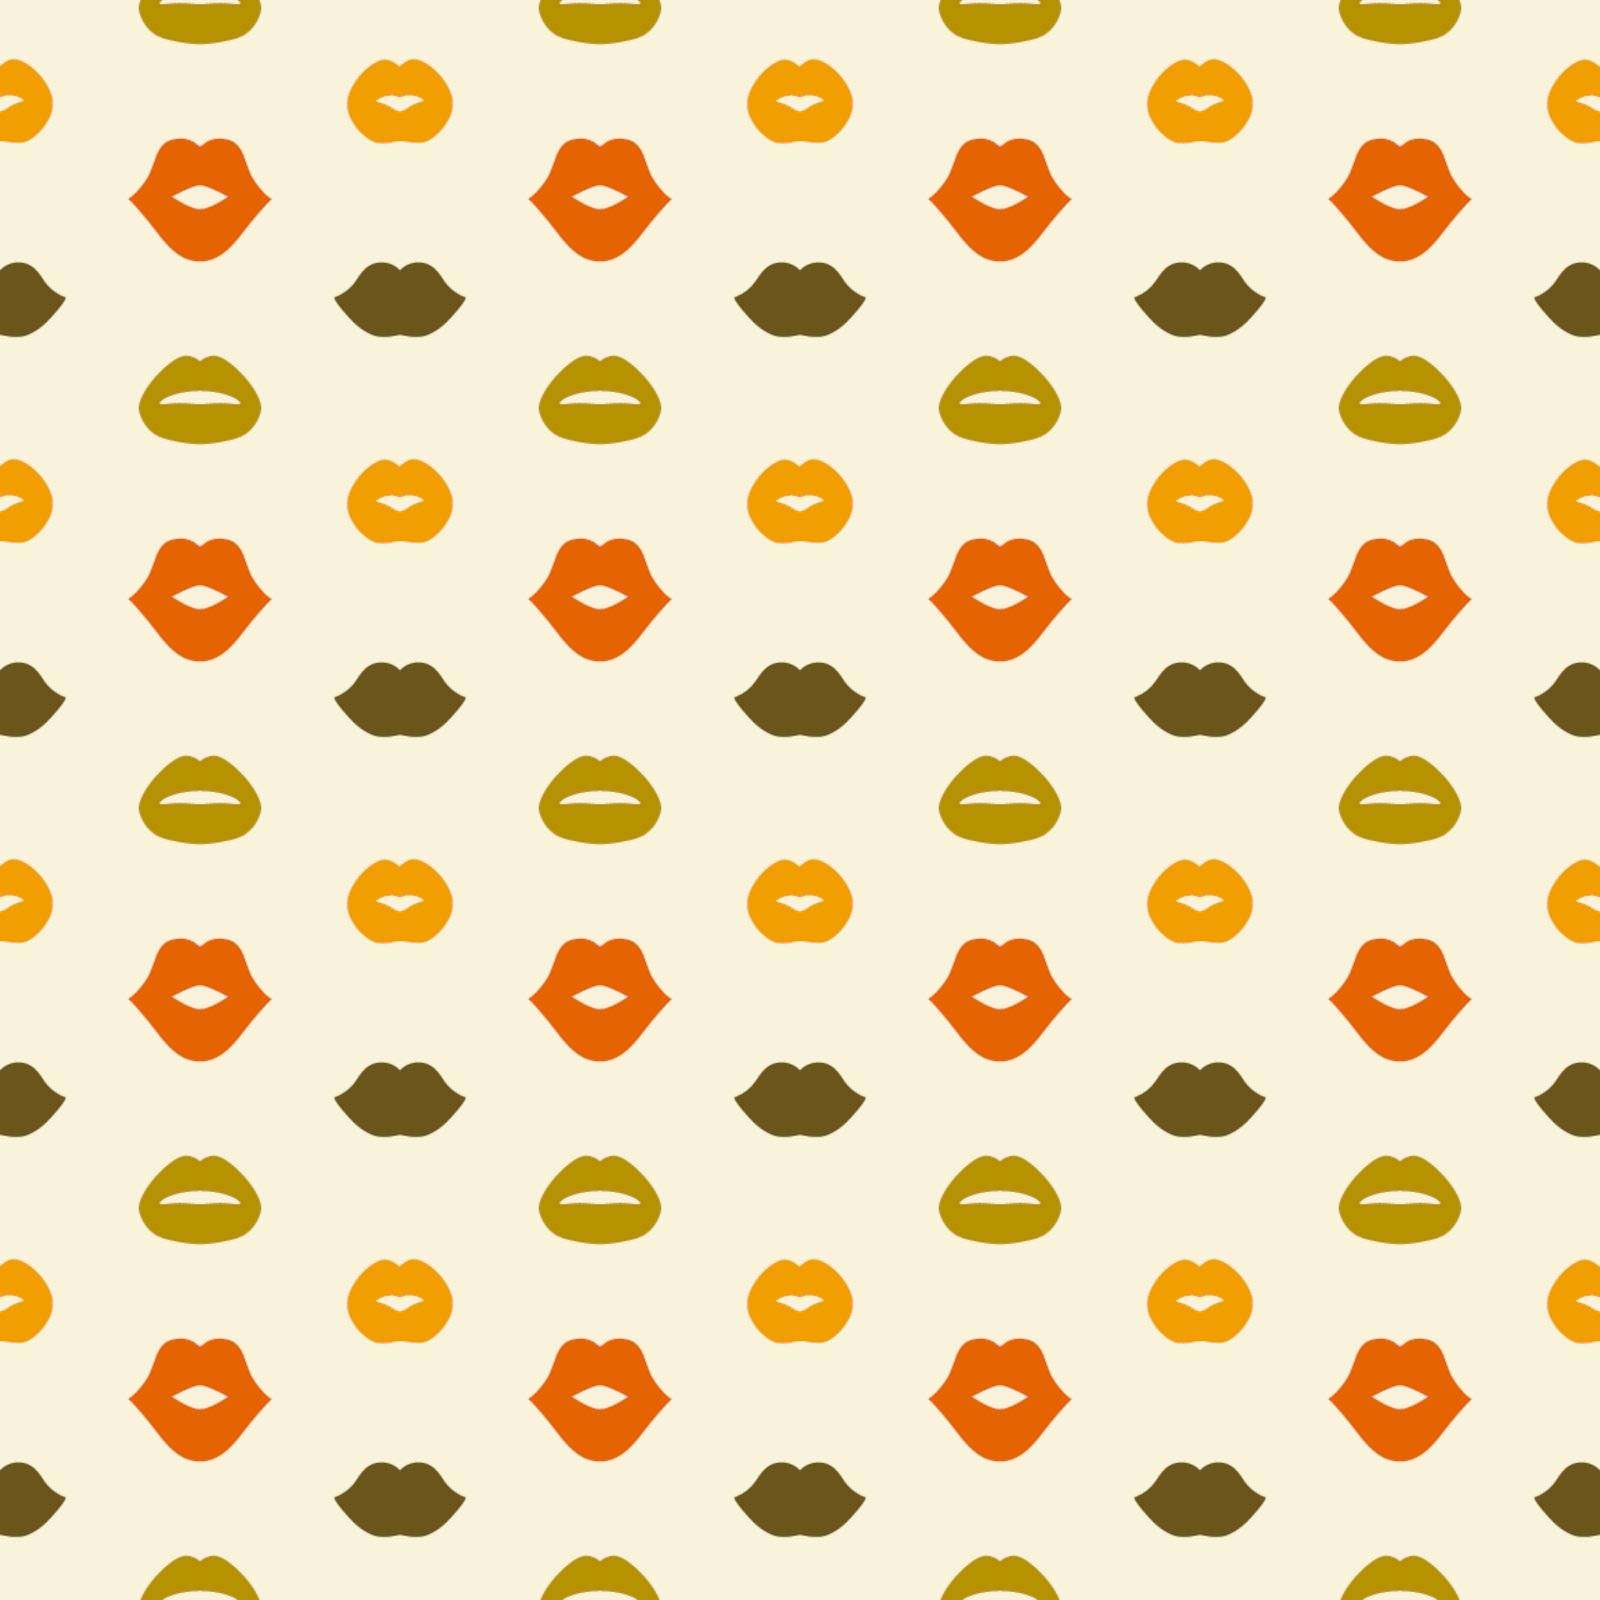 Lips Vector Seamless Pattern by Olka